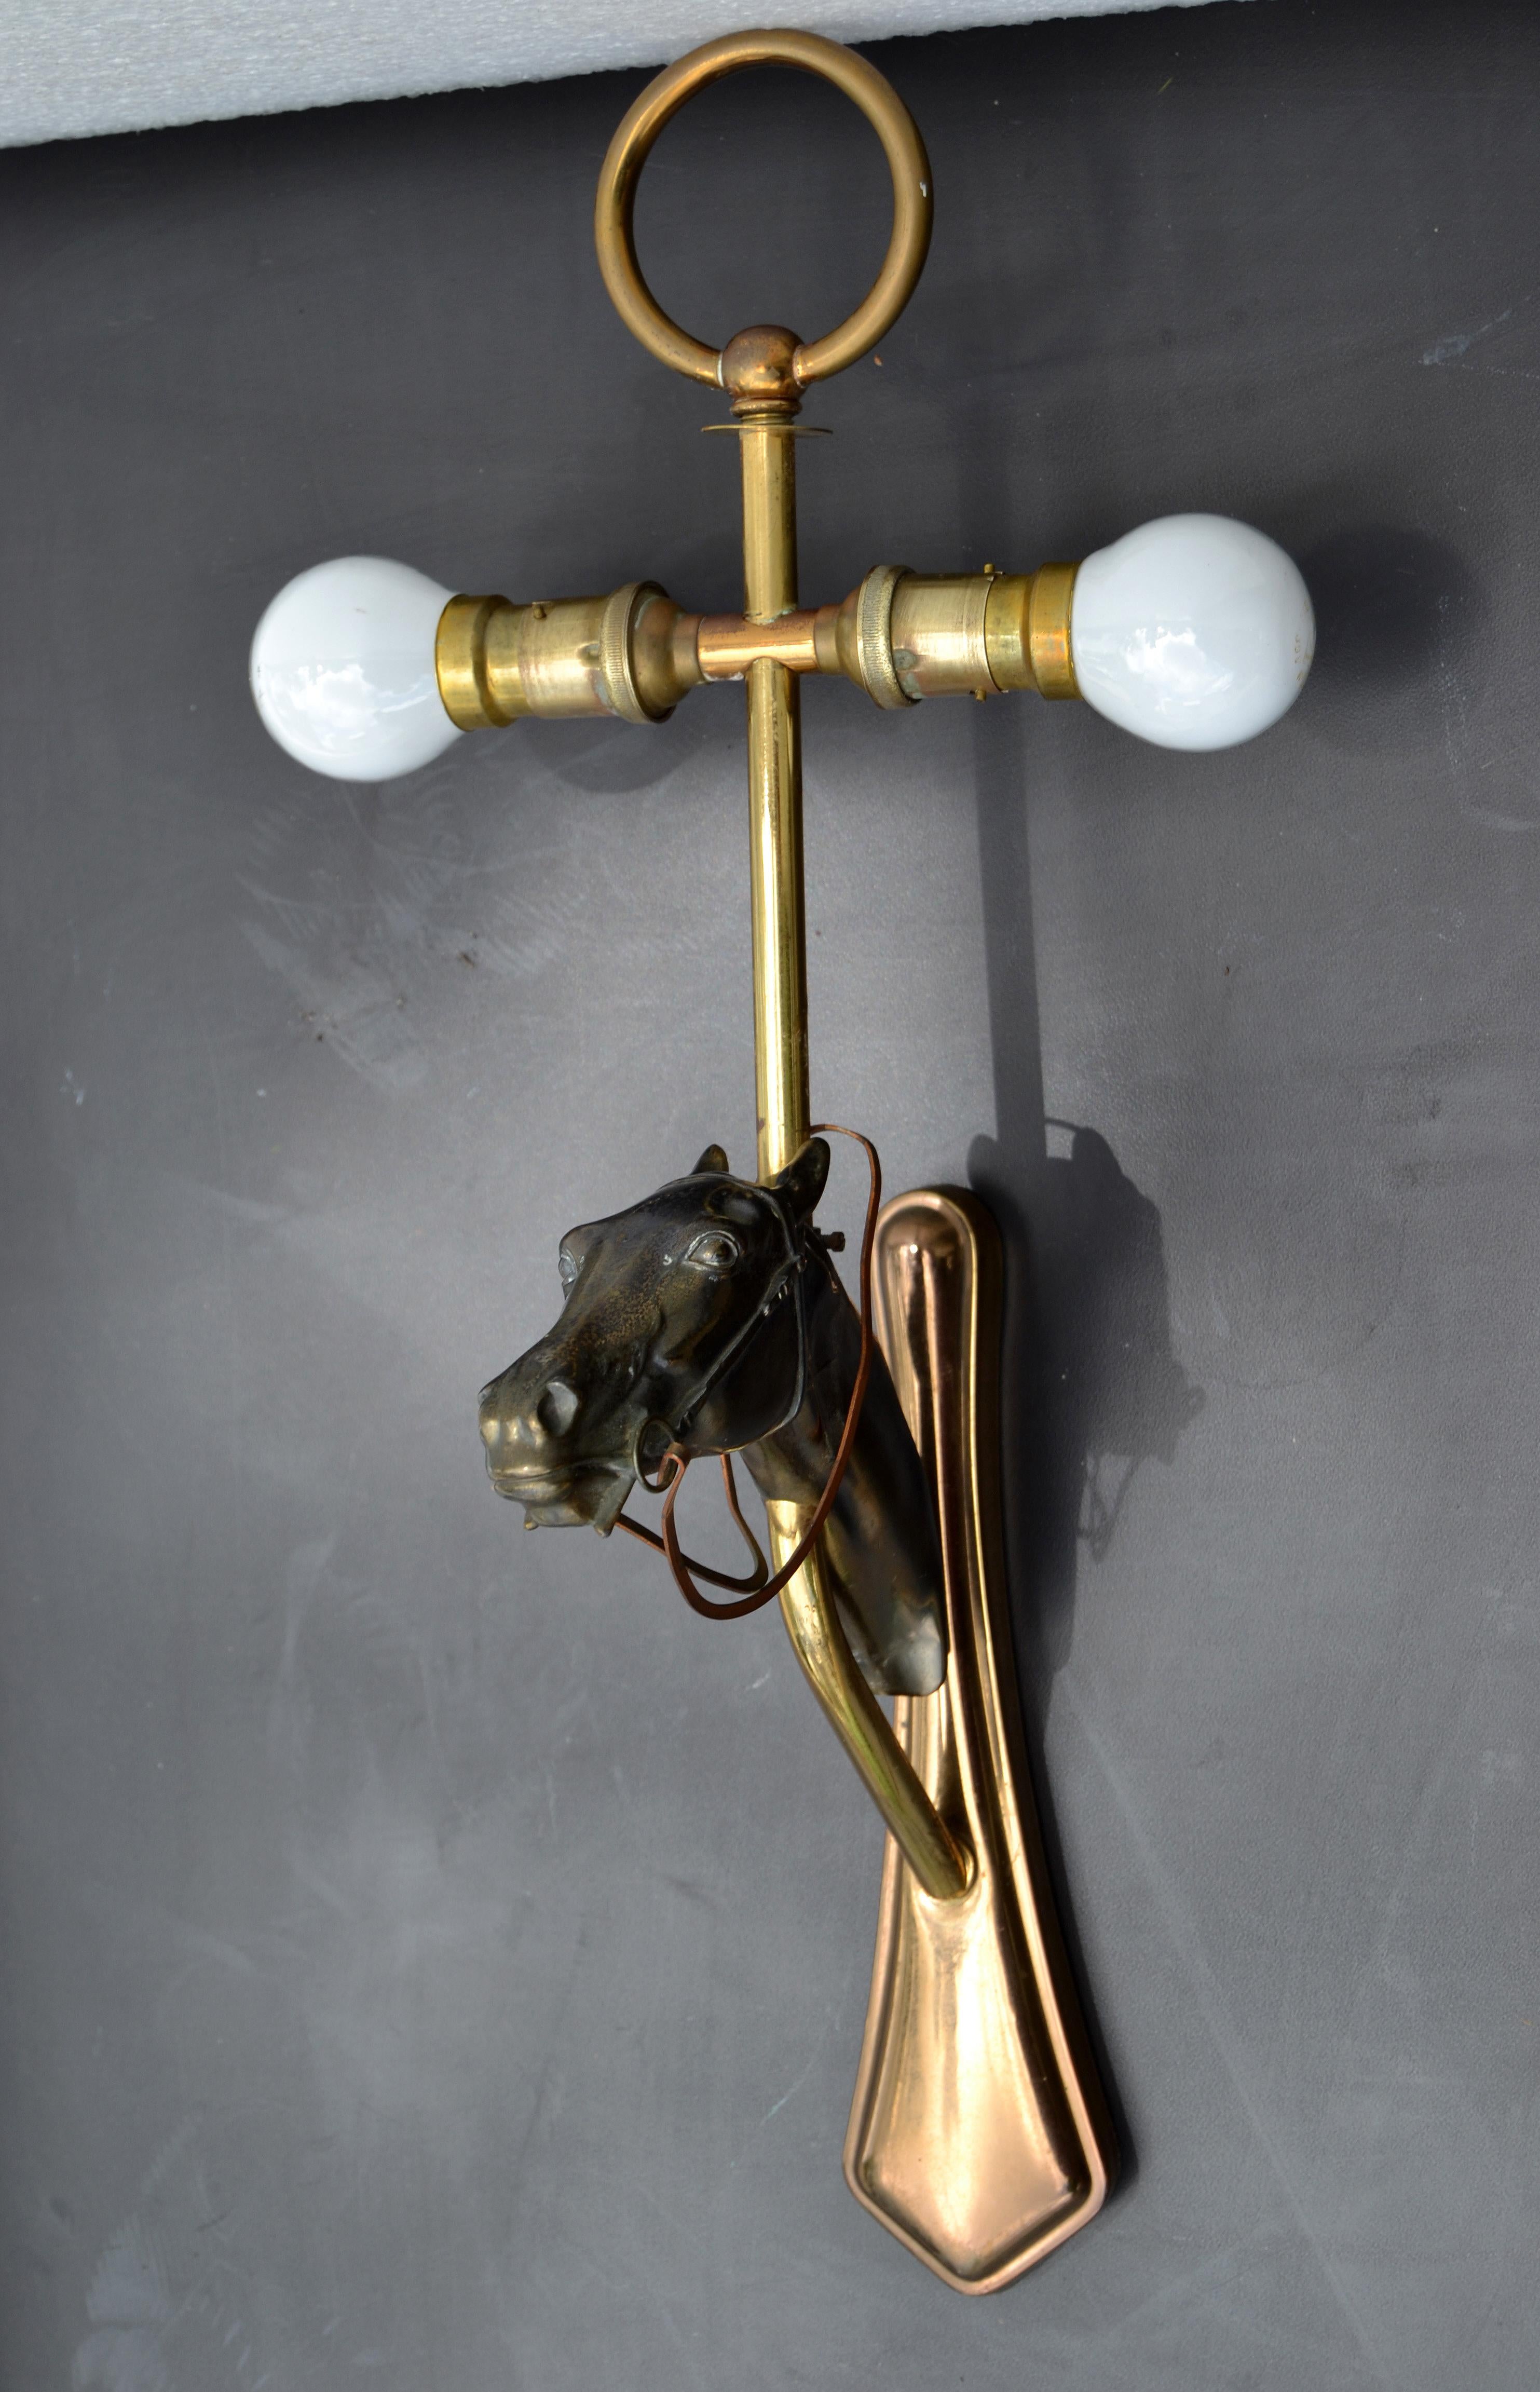 Polished Jacques Adnet Style Bronze Horse Sconce Wall Lamp French Neoclassical For Sale